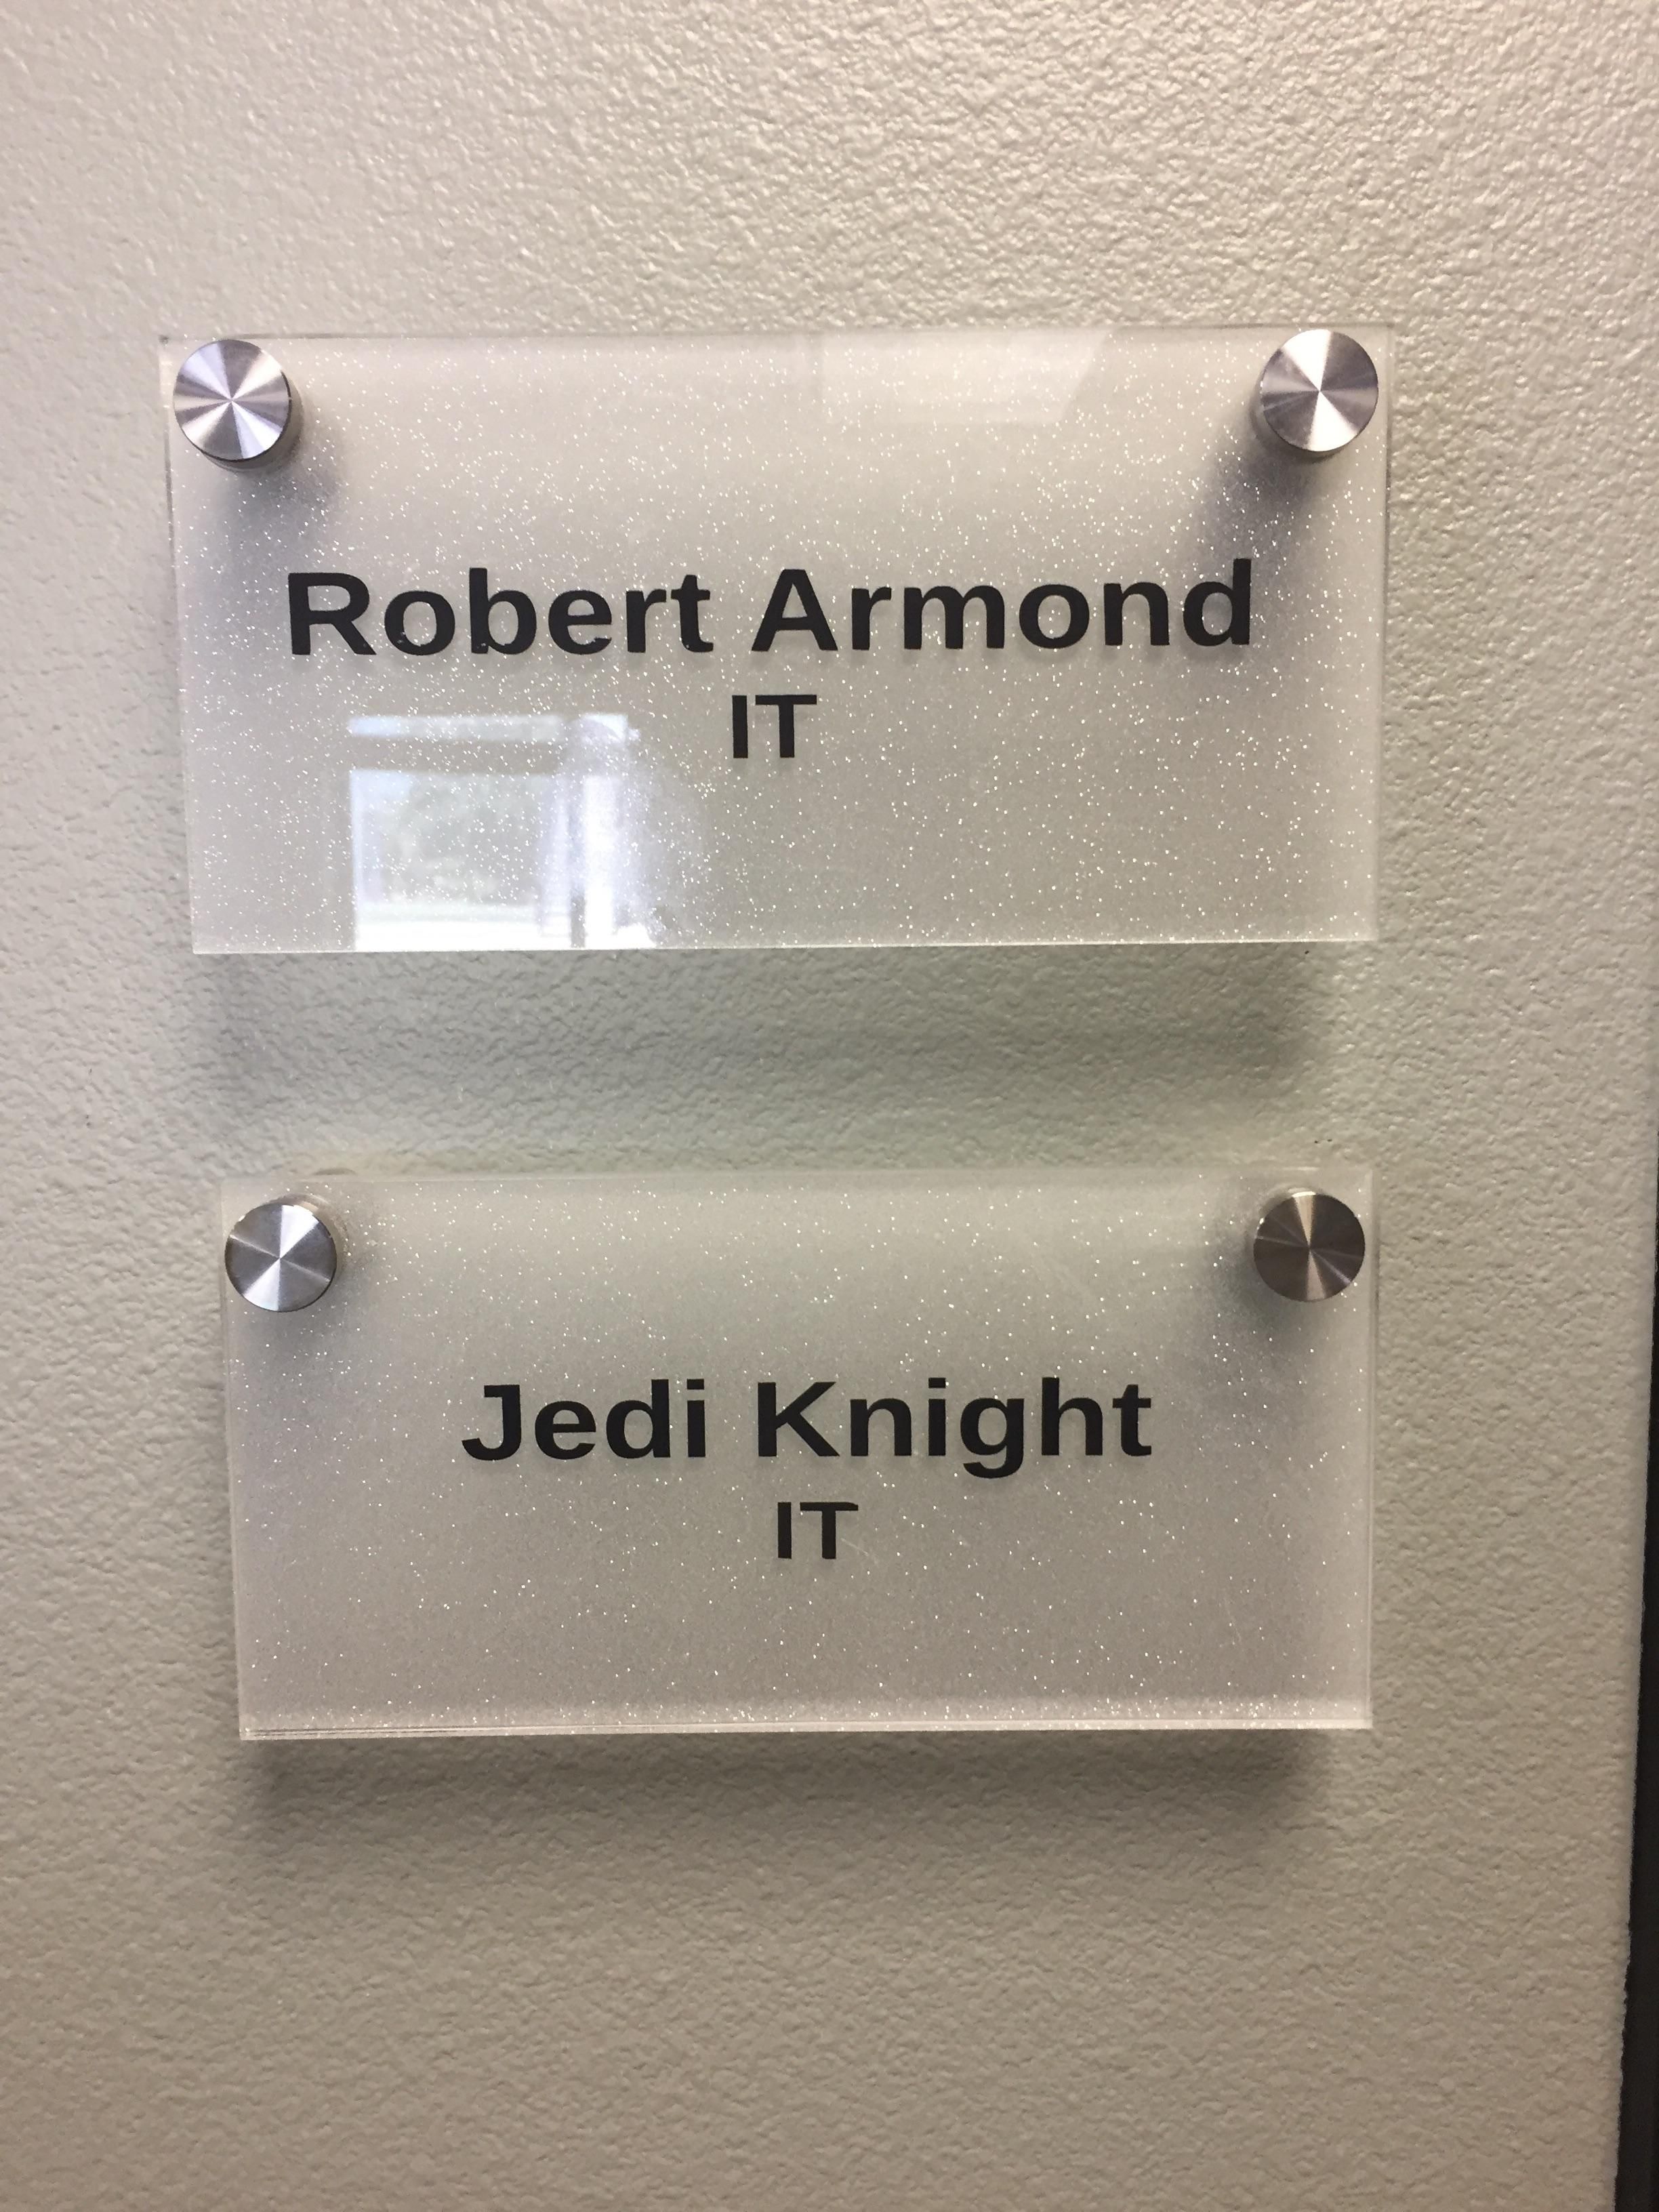 Our IT guys name is Jedediah Knight. This is what he goes by.